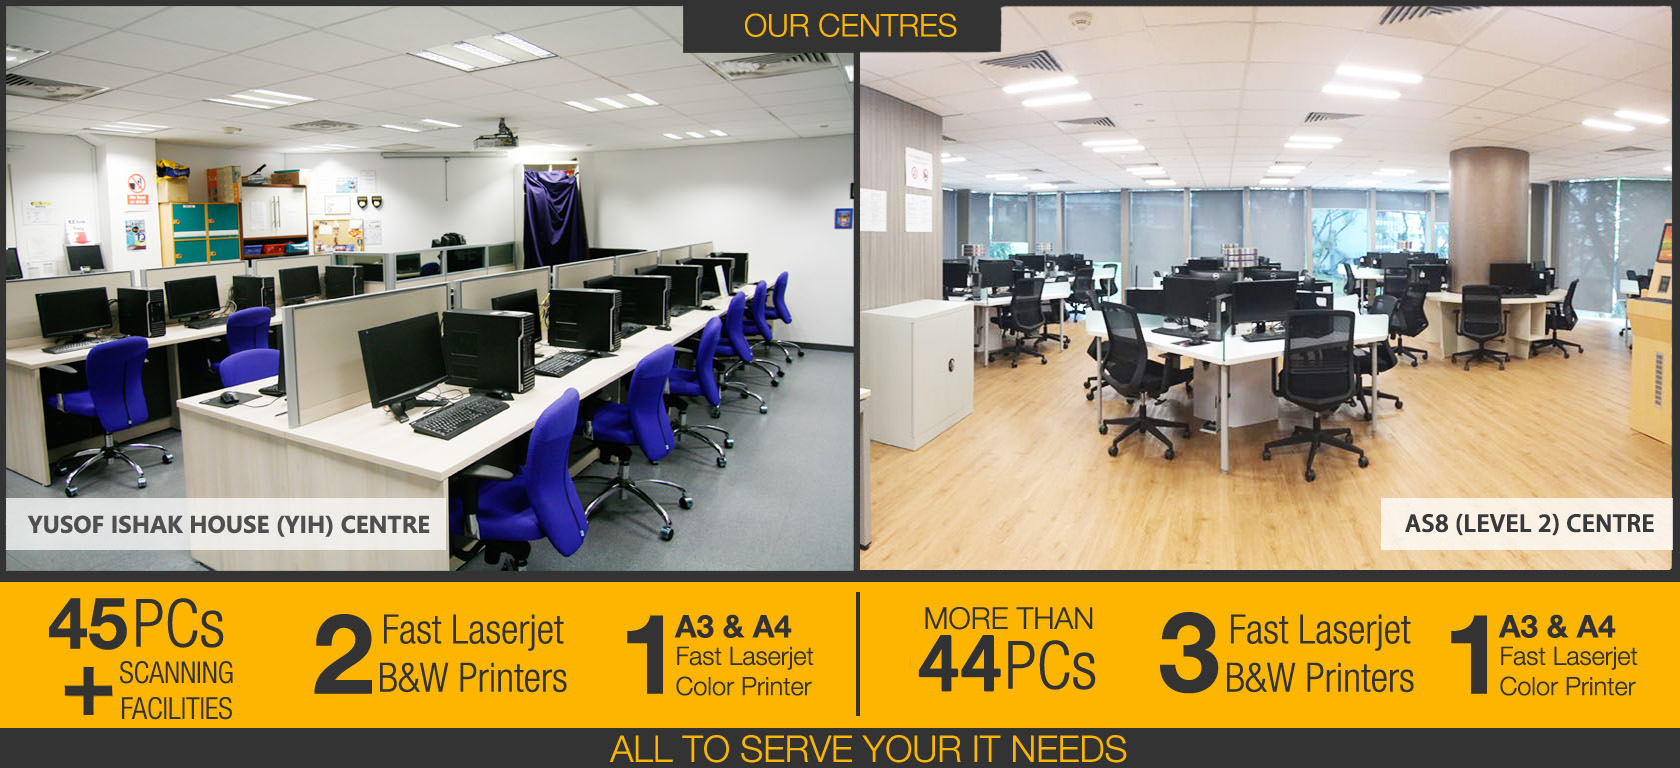 Our Computer Centres at YIH and AS8